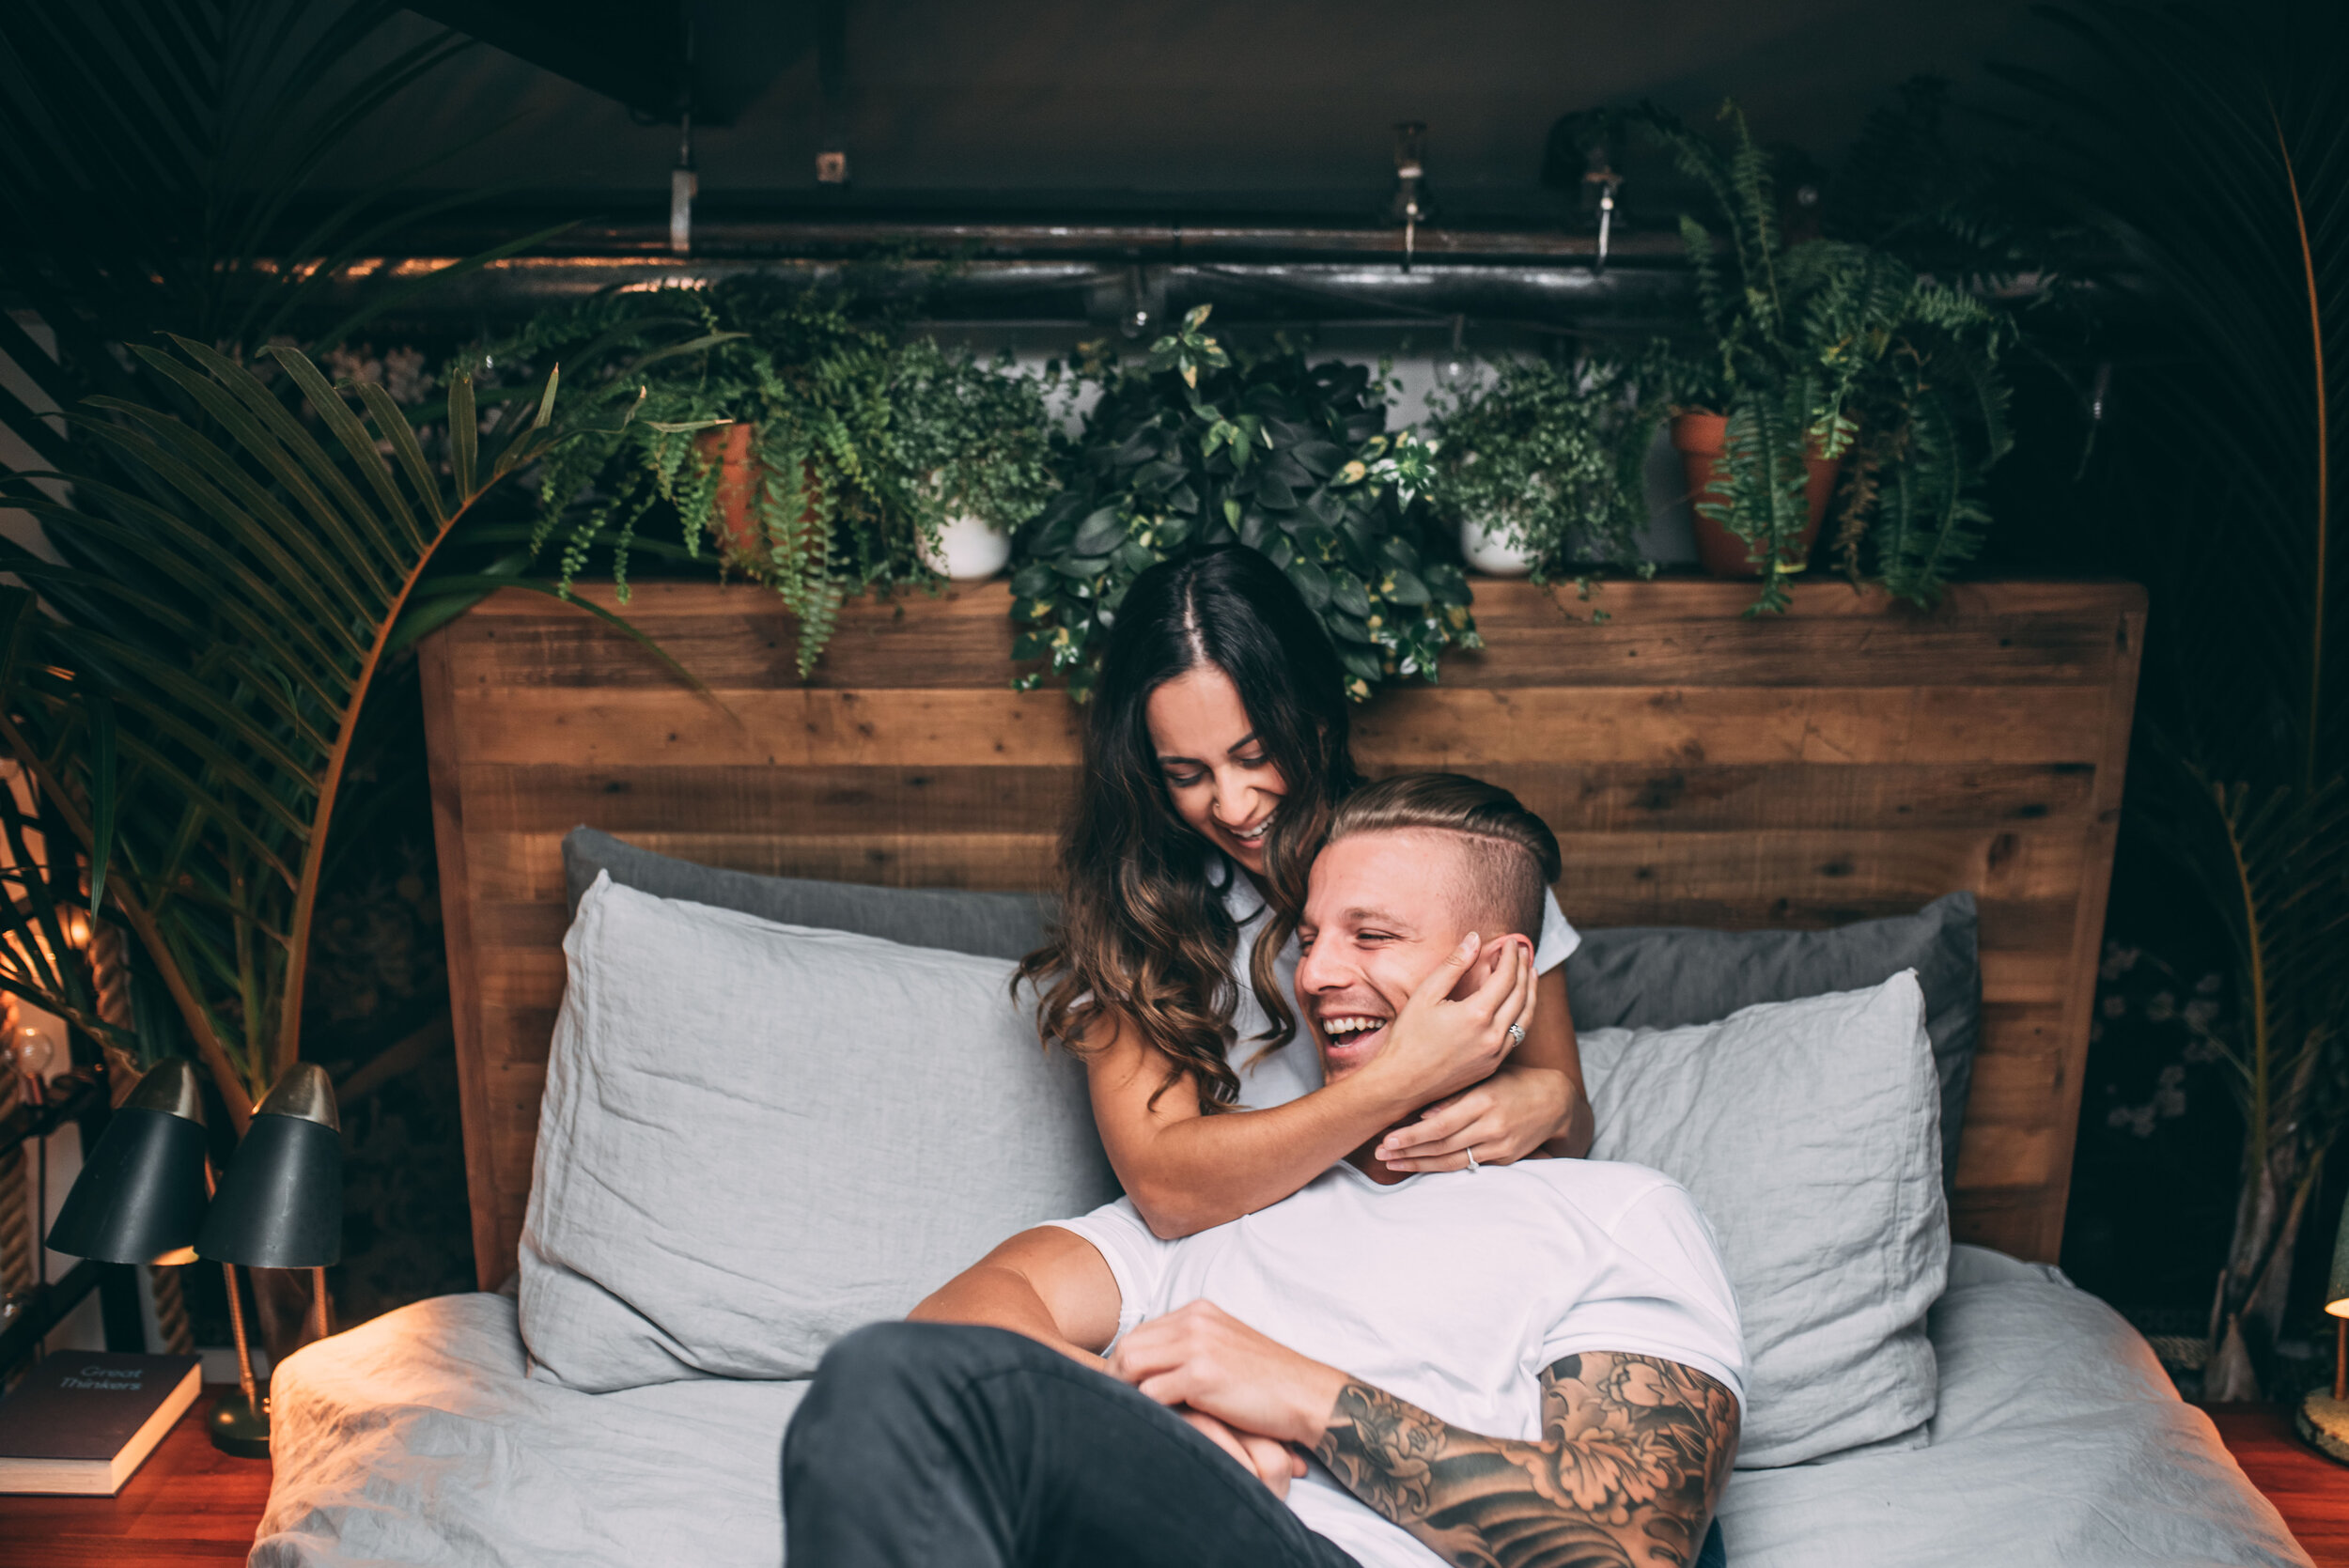 Vancouver Engagement Session - In Home Couples Session - Loft Garden Oasis - Laura Olson Photography - Sunshine Coast BC & Vancouver Wedding & Elopement Photographer7742.jpg